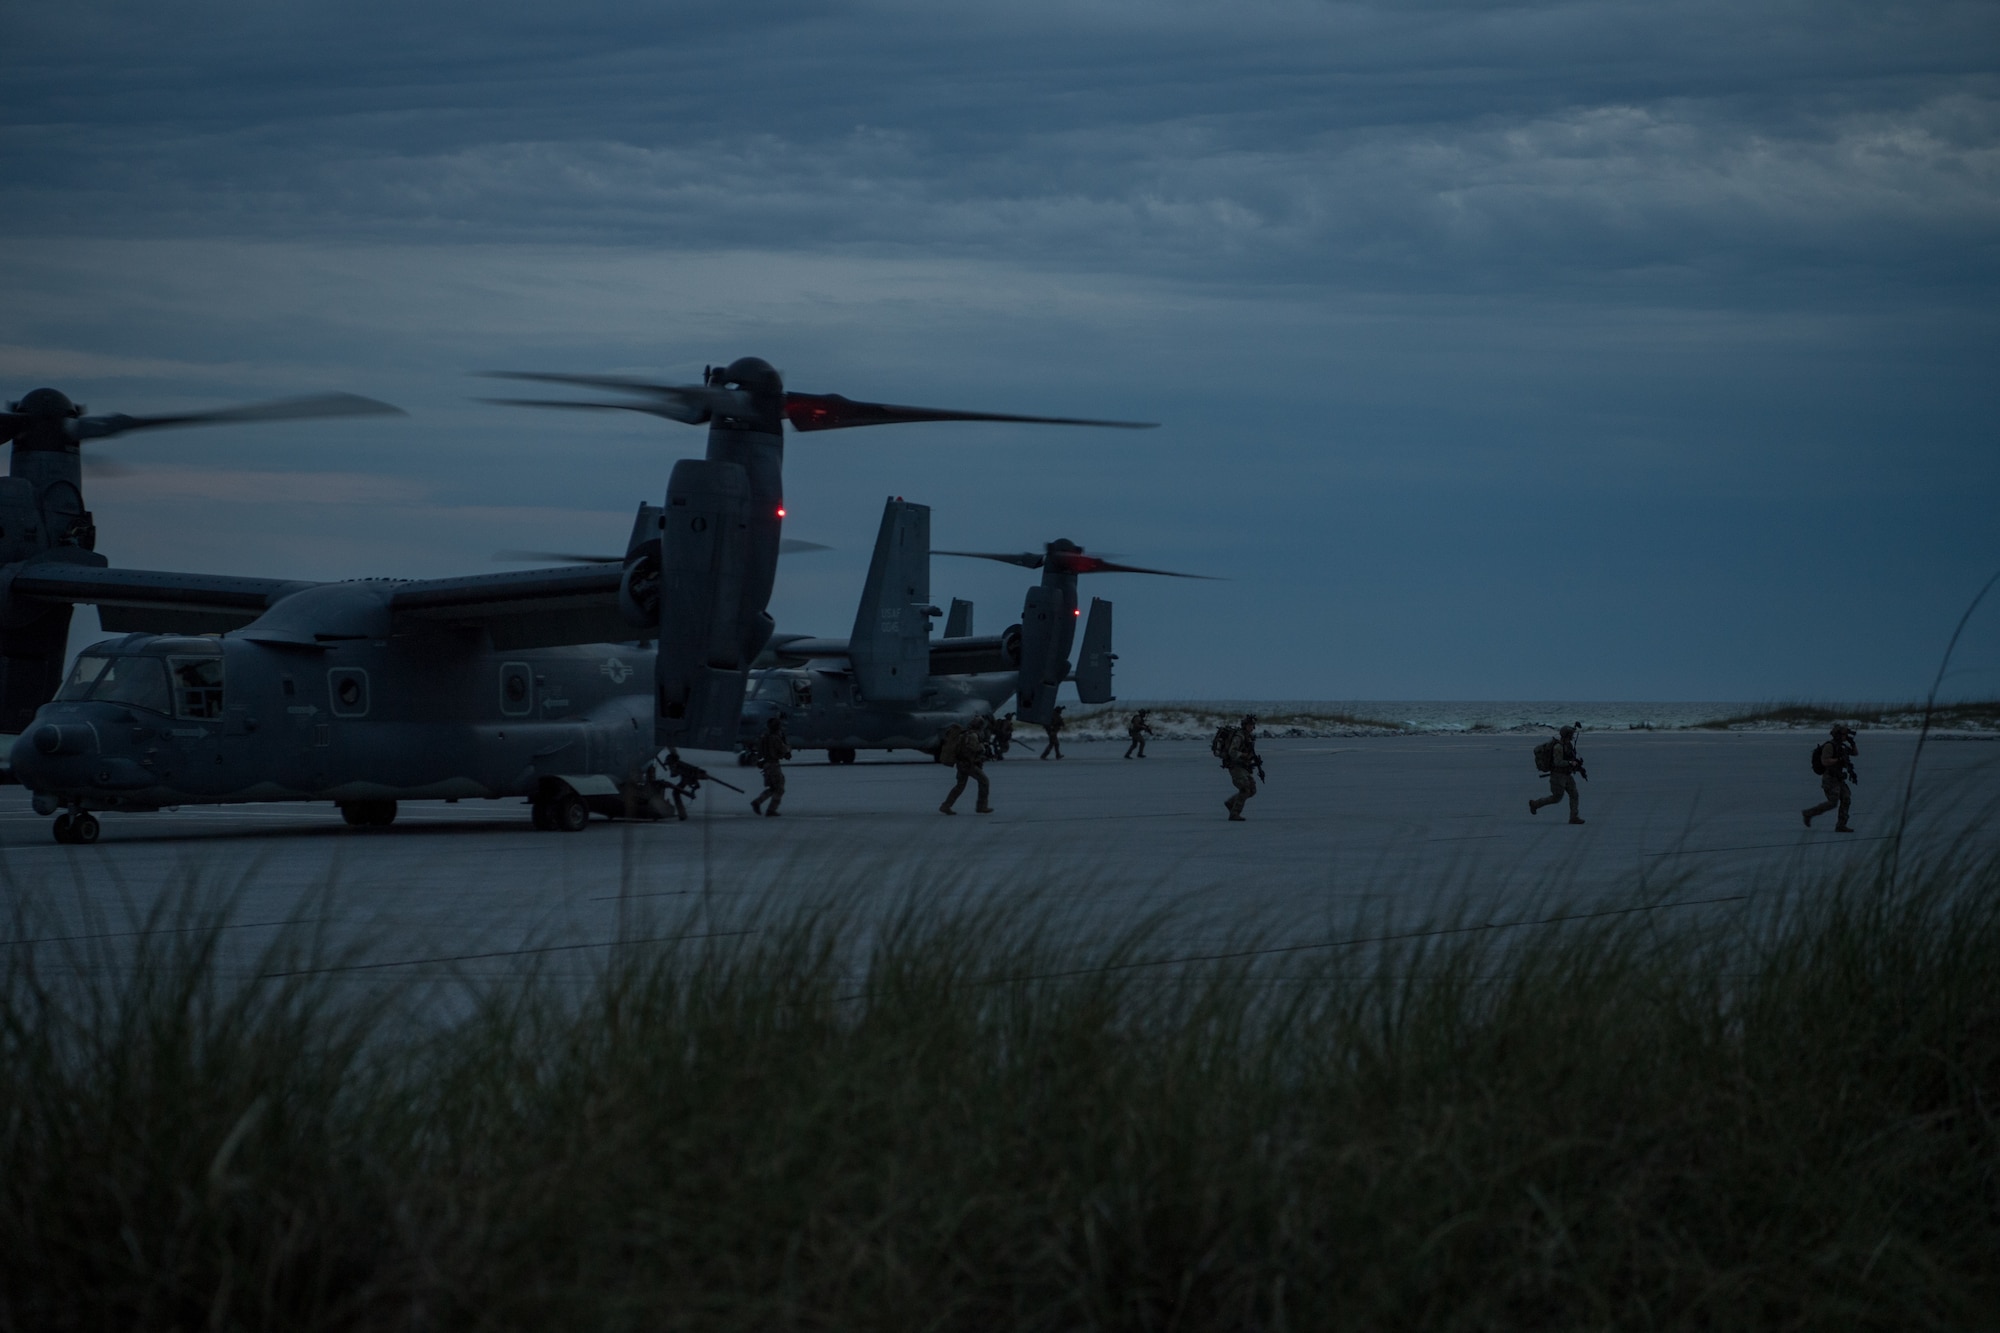 rotary aircraft sit on a landing zone with airmen walking out onto a beach